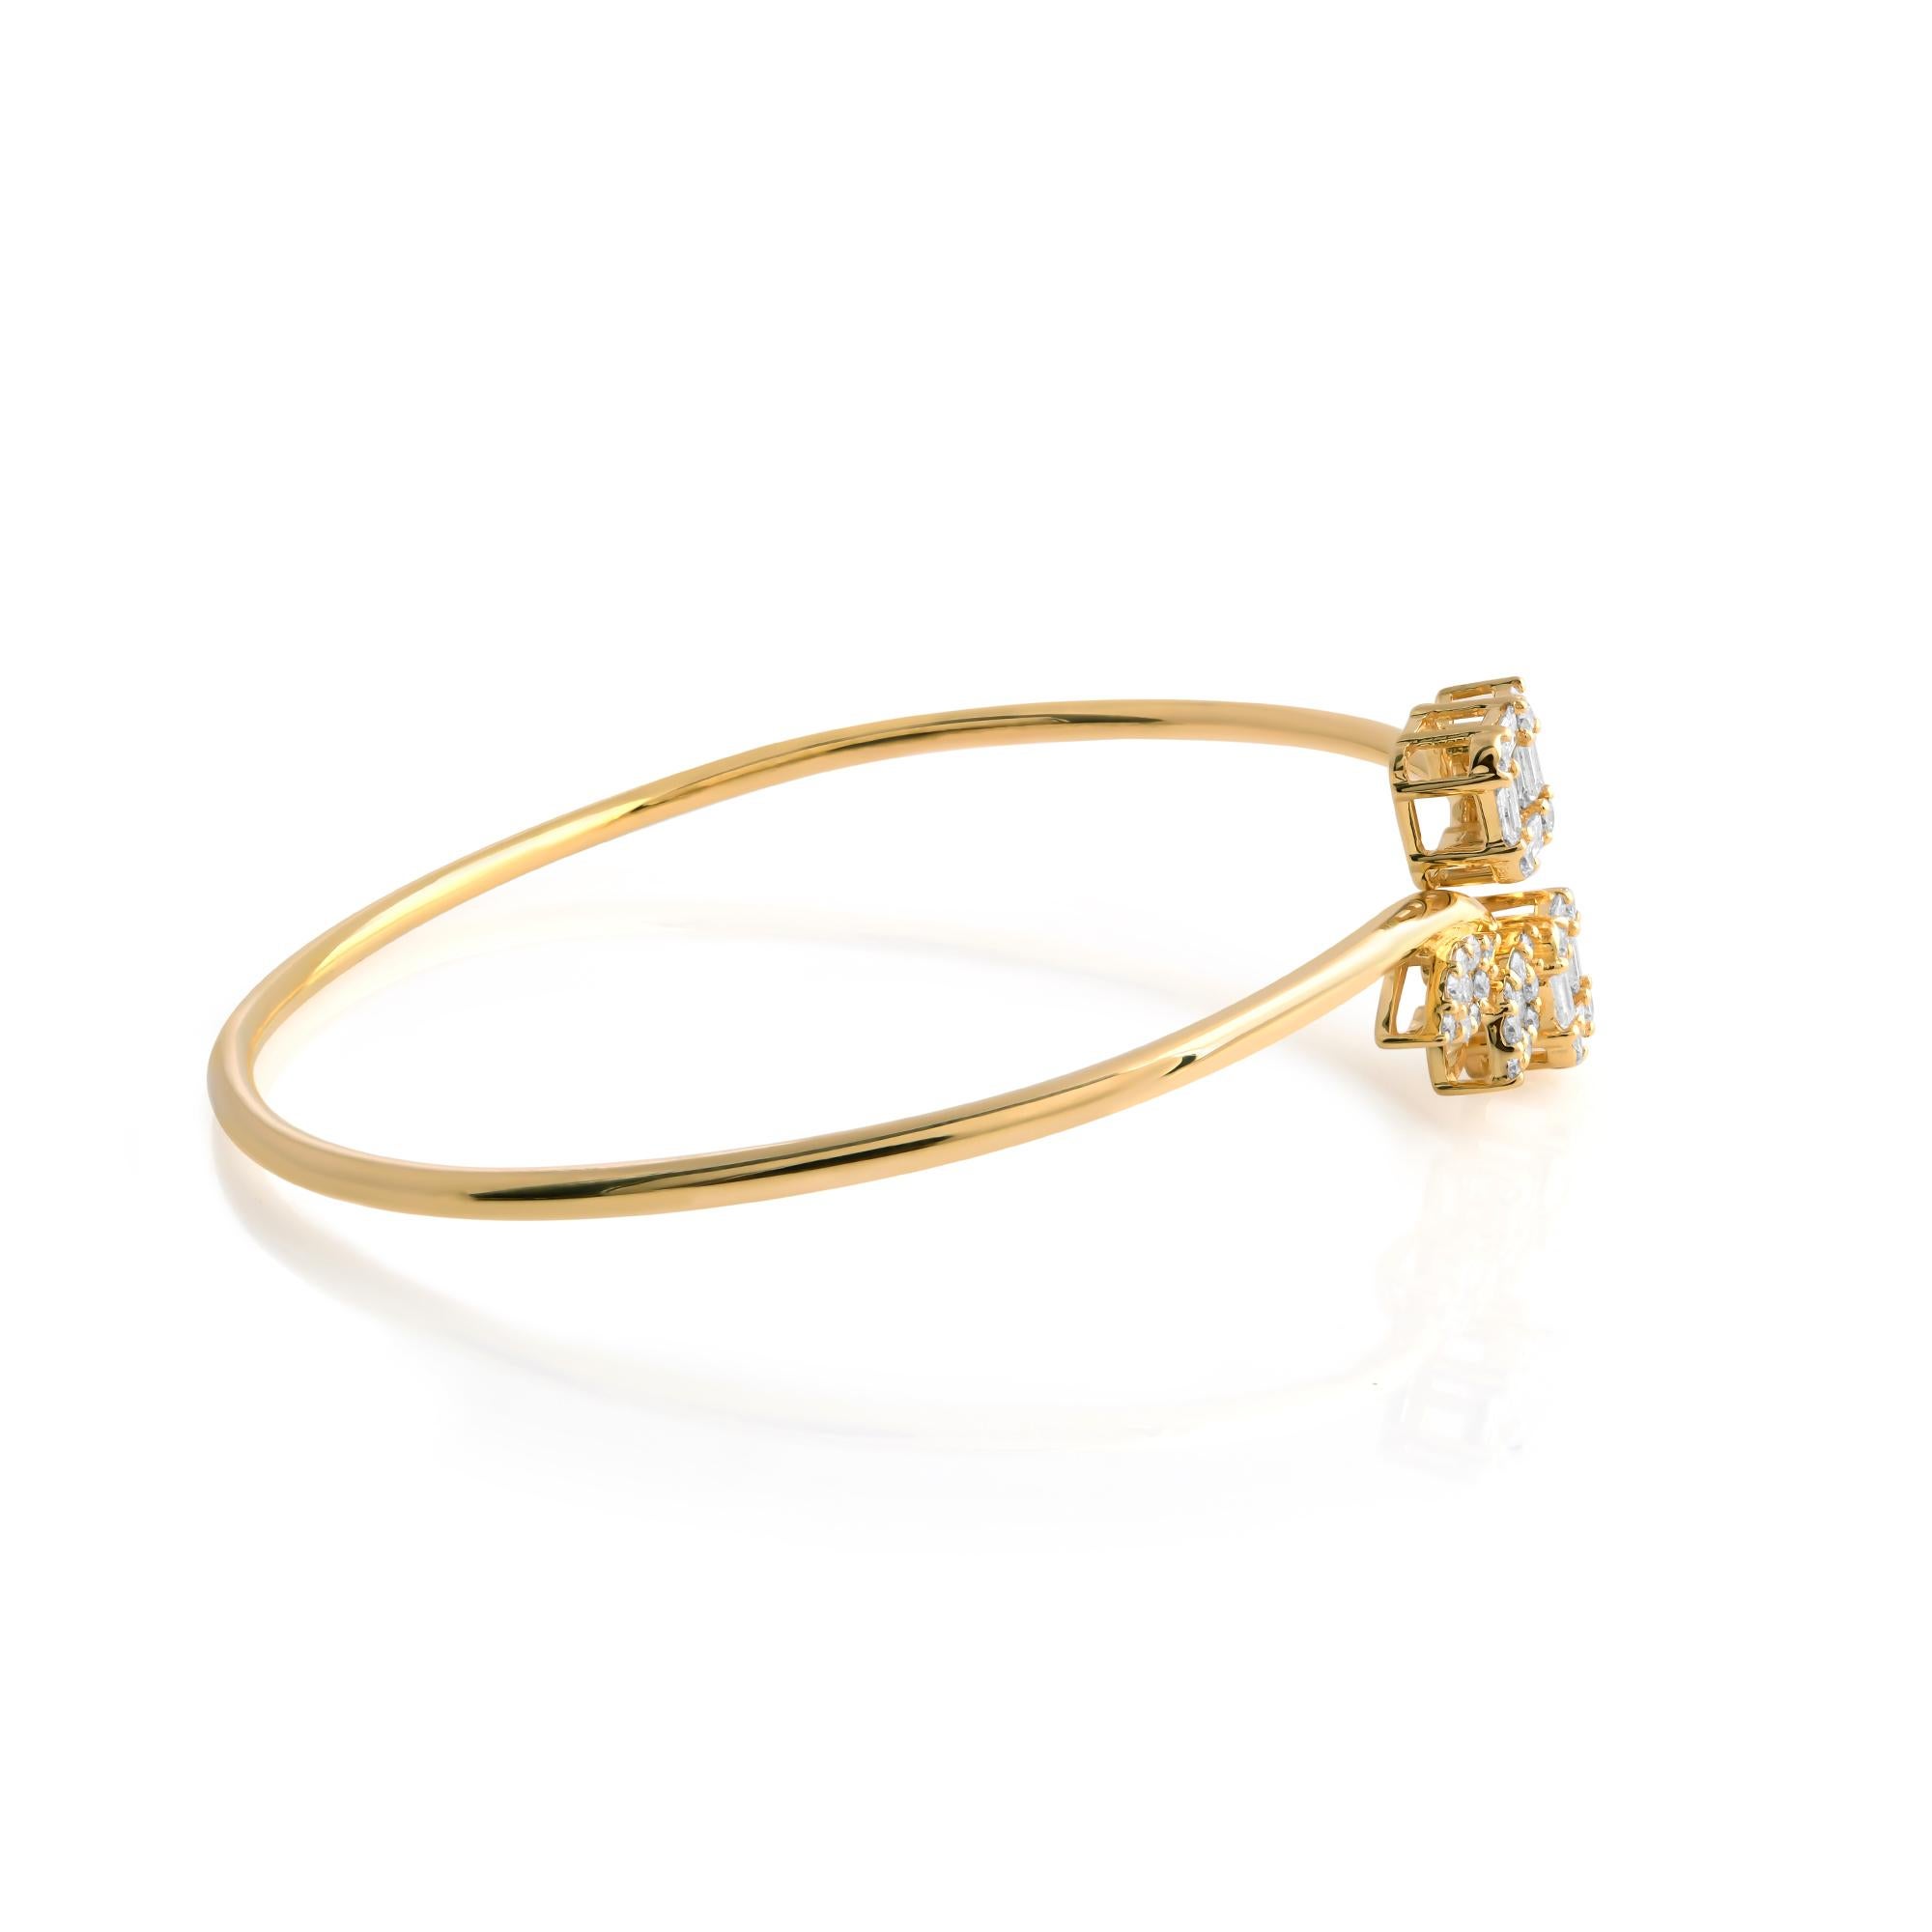 Indulge in the timeless elegance of this exquisite Natural SI/HI Baguette Diamond Cuff Bangle Bracelet crafted in lustrous 14 Karat Yellow Gold. Each facet of this bracelet exudes sophistication and grace, making it a captivating addition to any